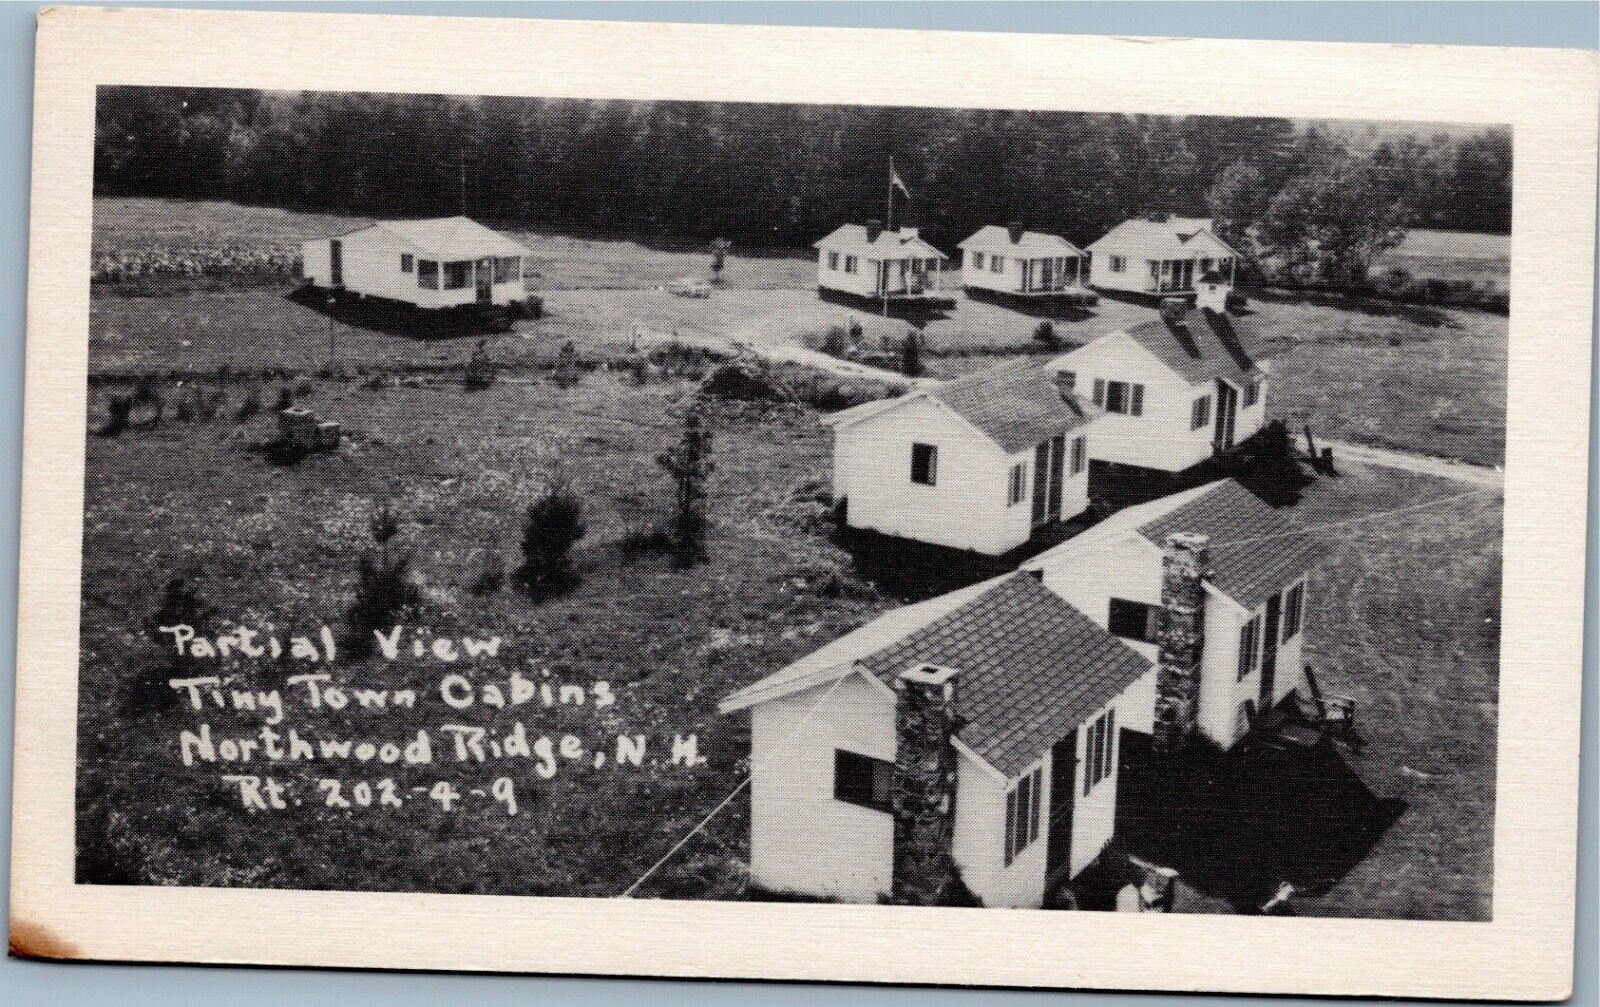 Northwood Ridge, New Hampshire - Partial View Tiny Town Cabins postcard